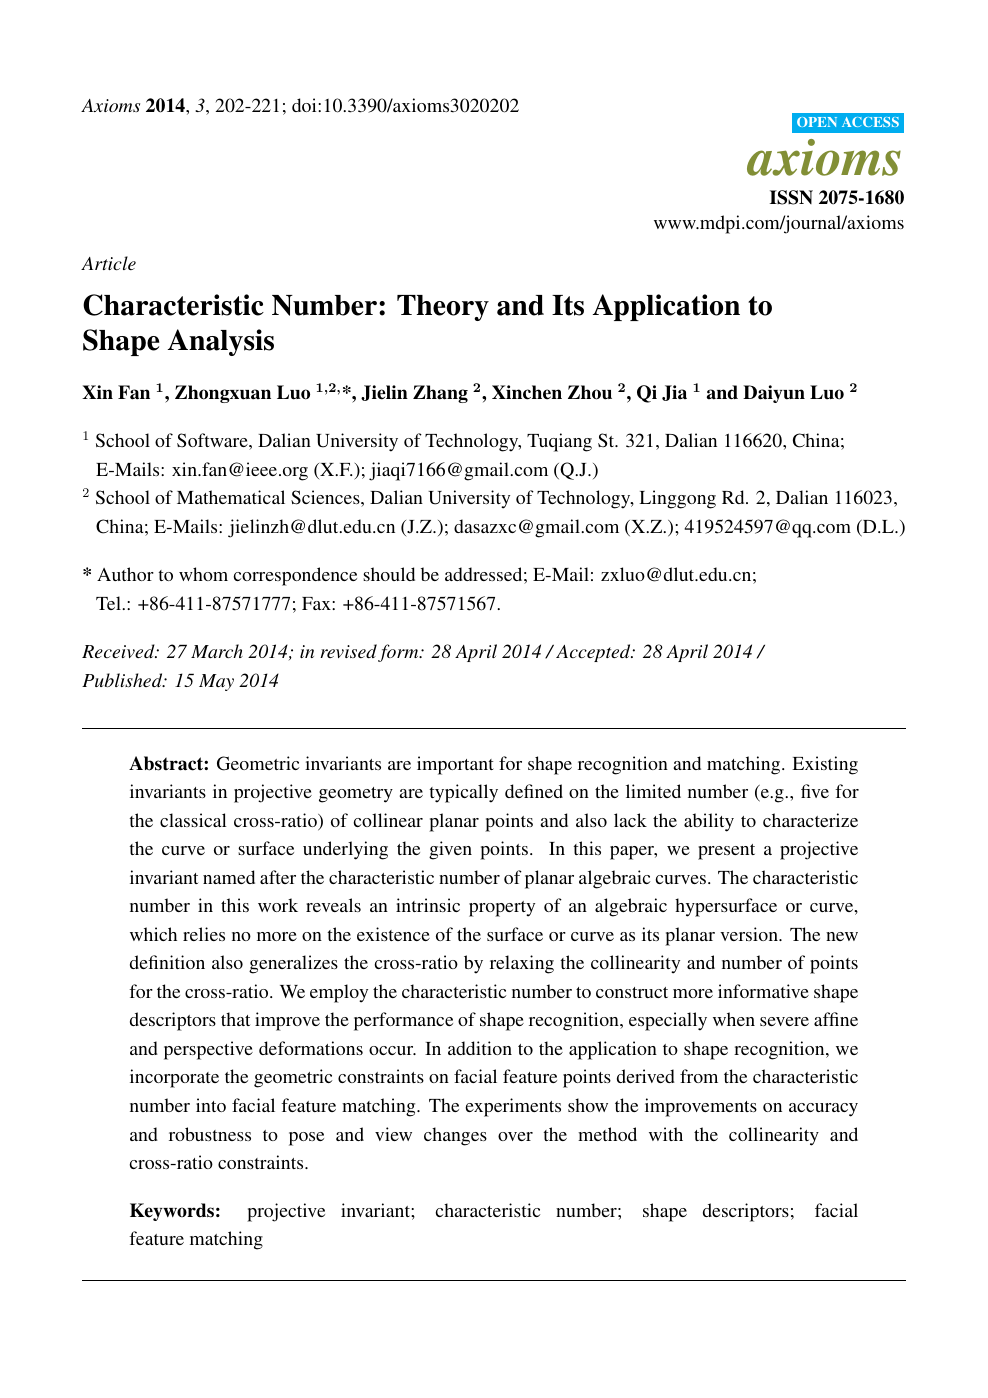 Characteristic Number Theory And Its Application To Shape Analysis Topic Of Research Paper In Mathematics Download Scholarly Article Pdf And Read For Free On Cyberleninka Open Science Hub